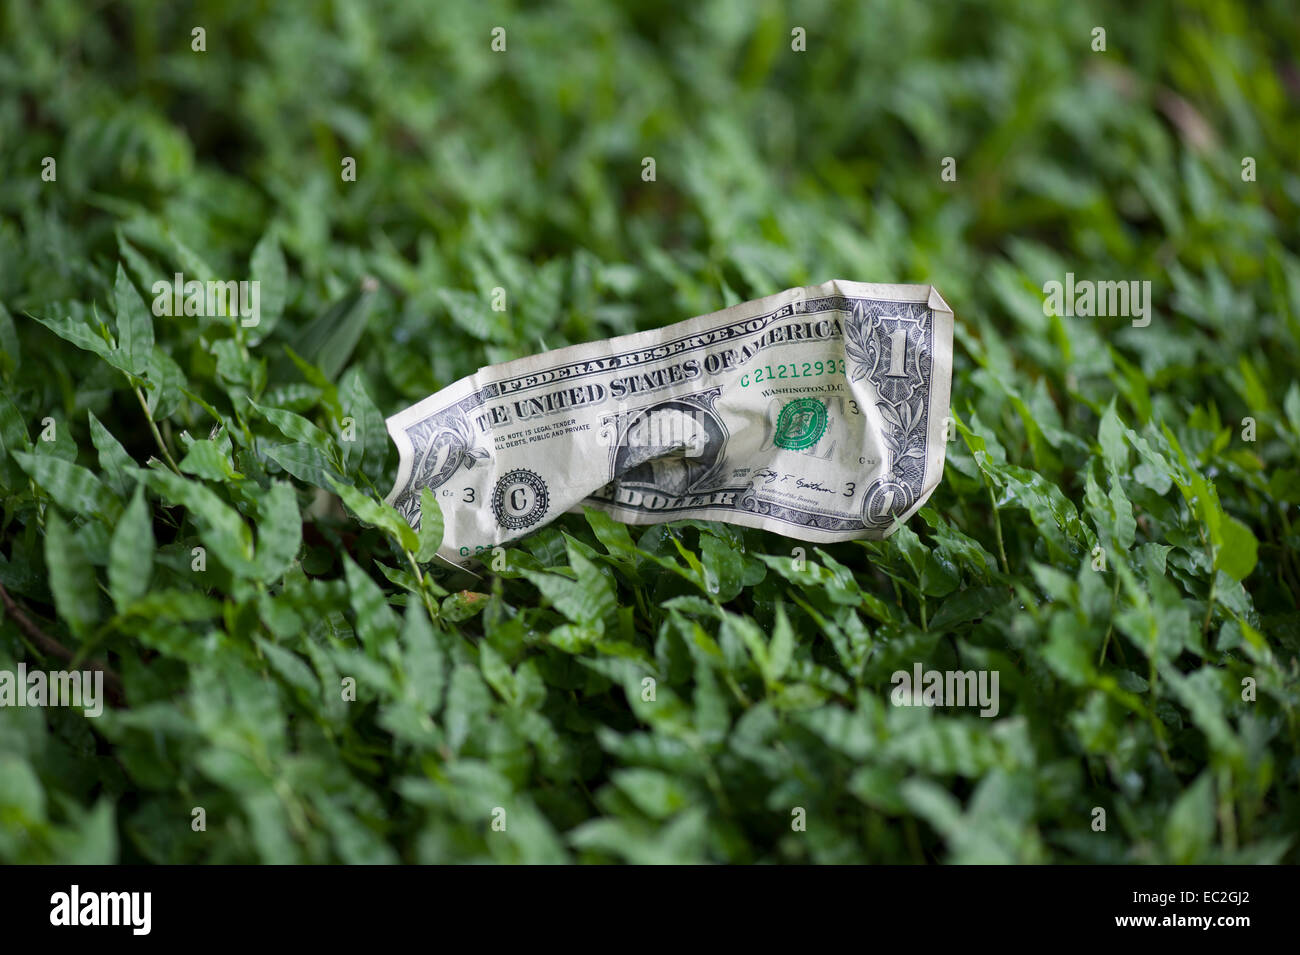 One dollar bill froissé lying on grass Banque D'Images